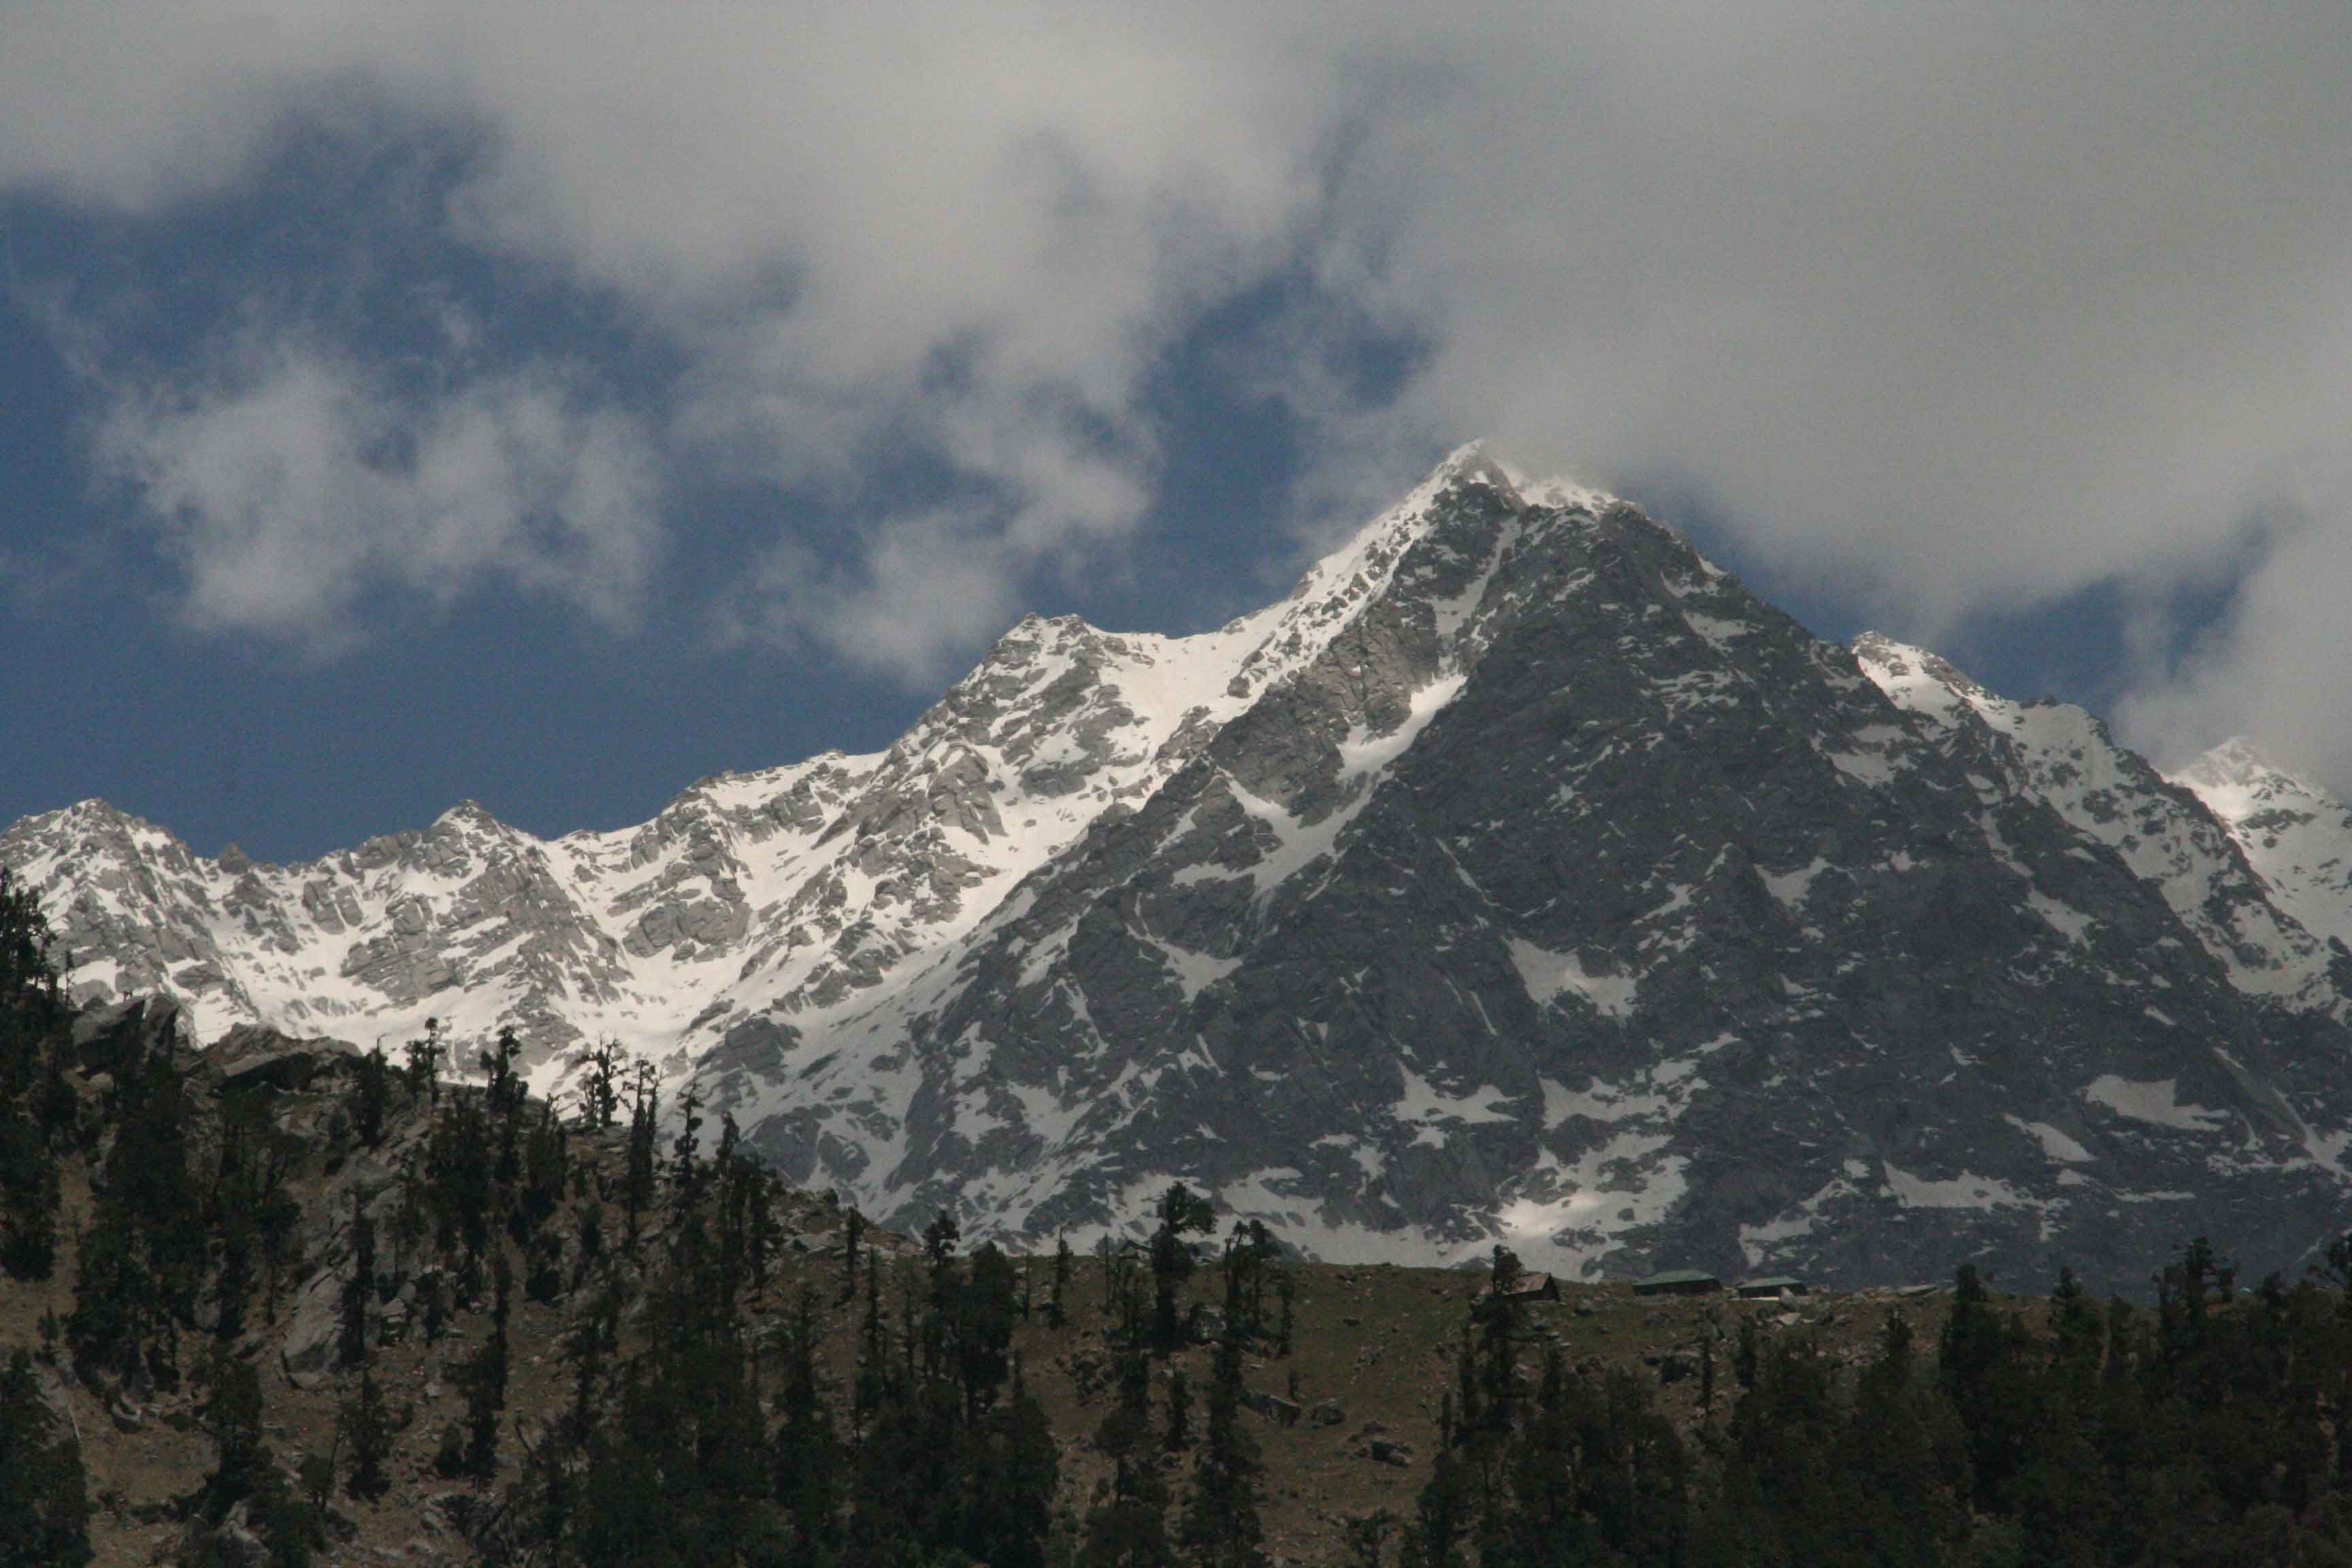 View of the Dhaludar Mountain Range from the Triund Path